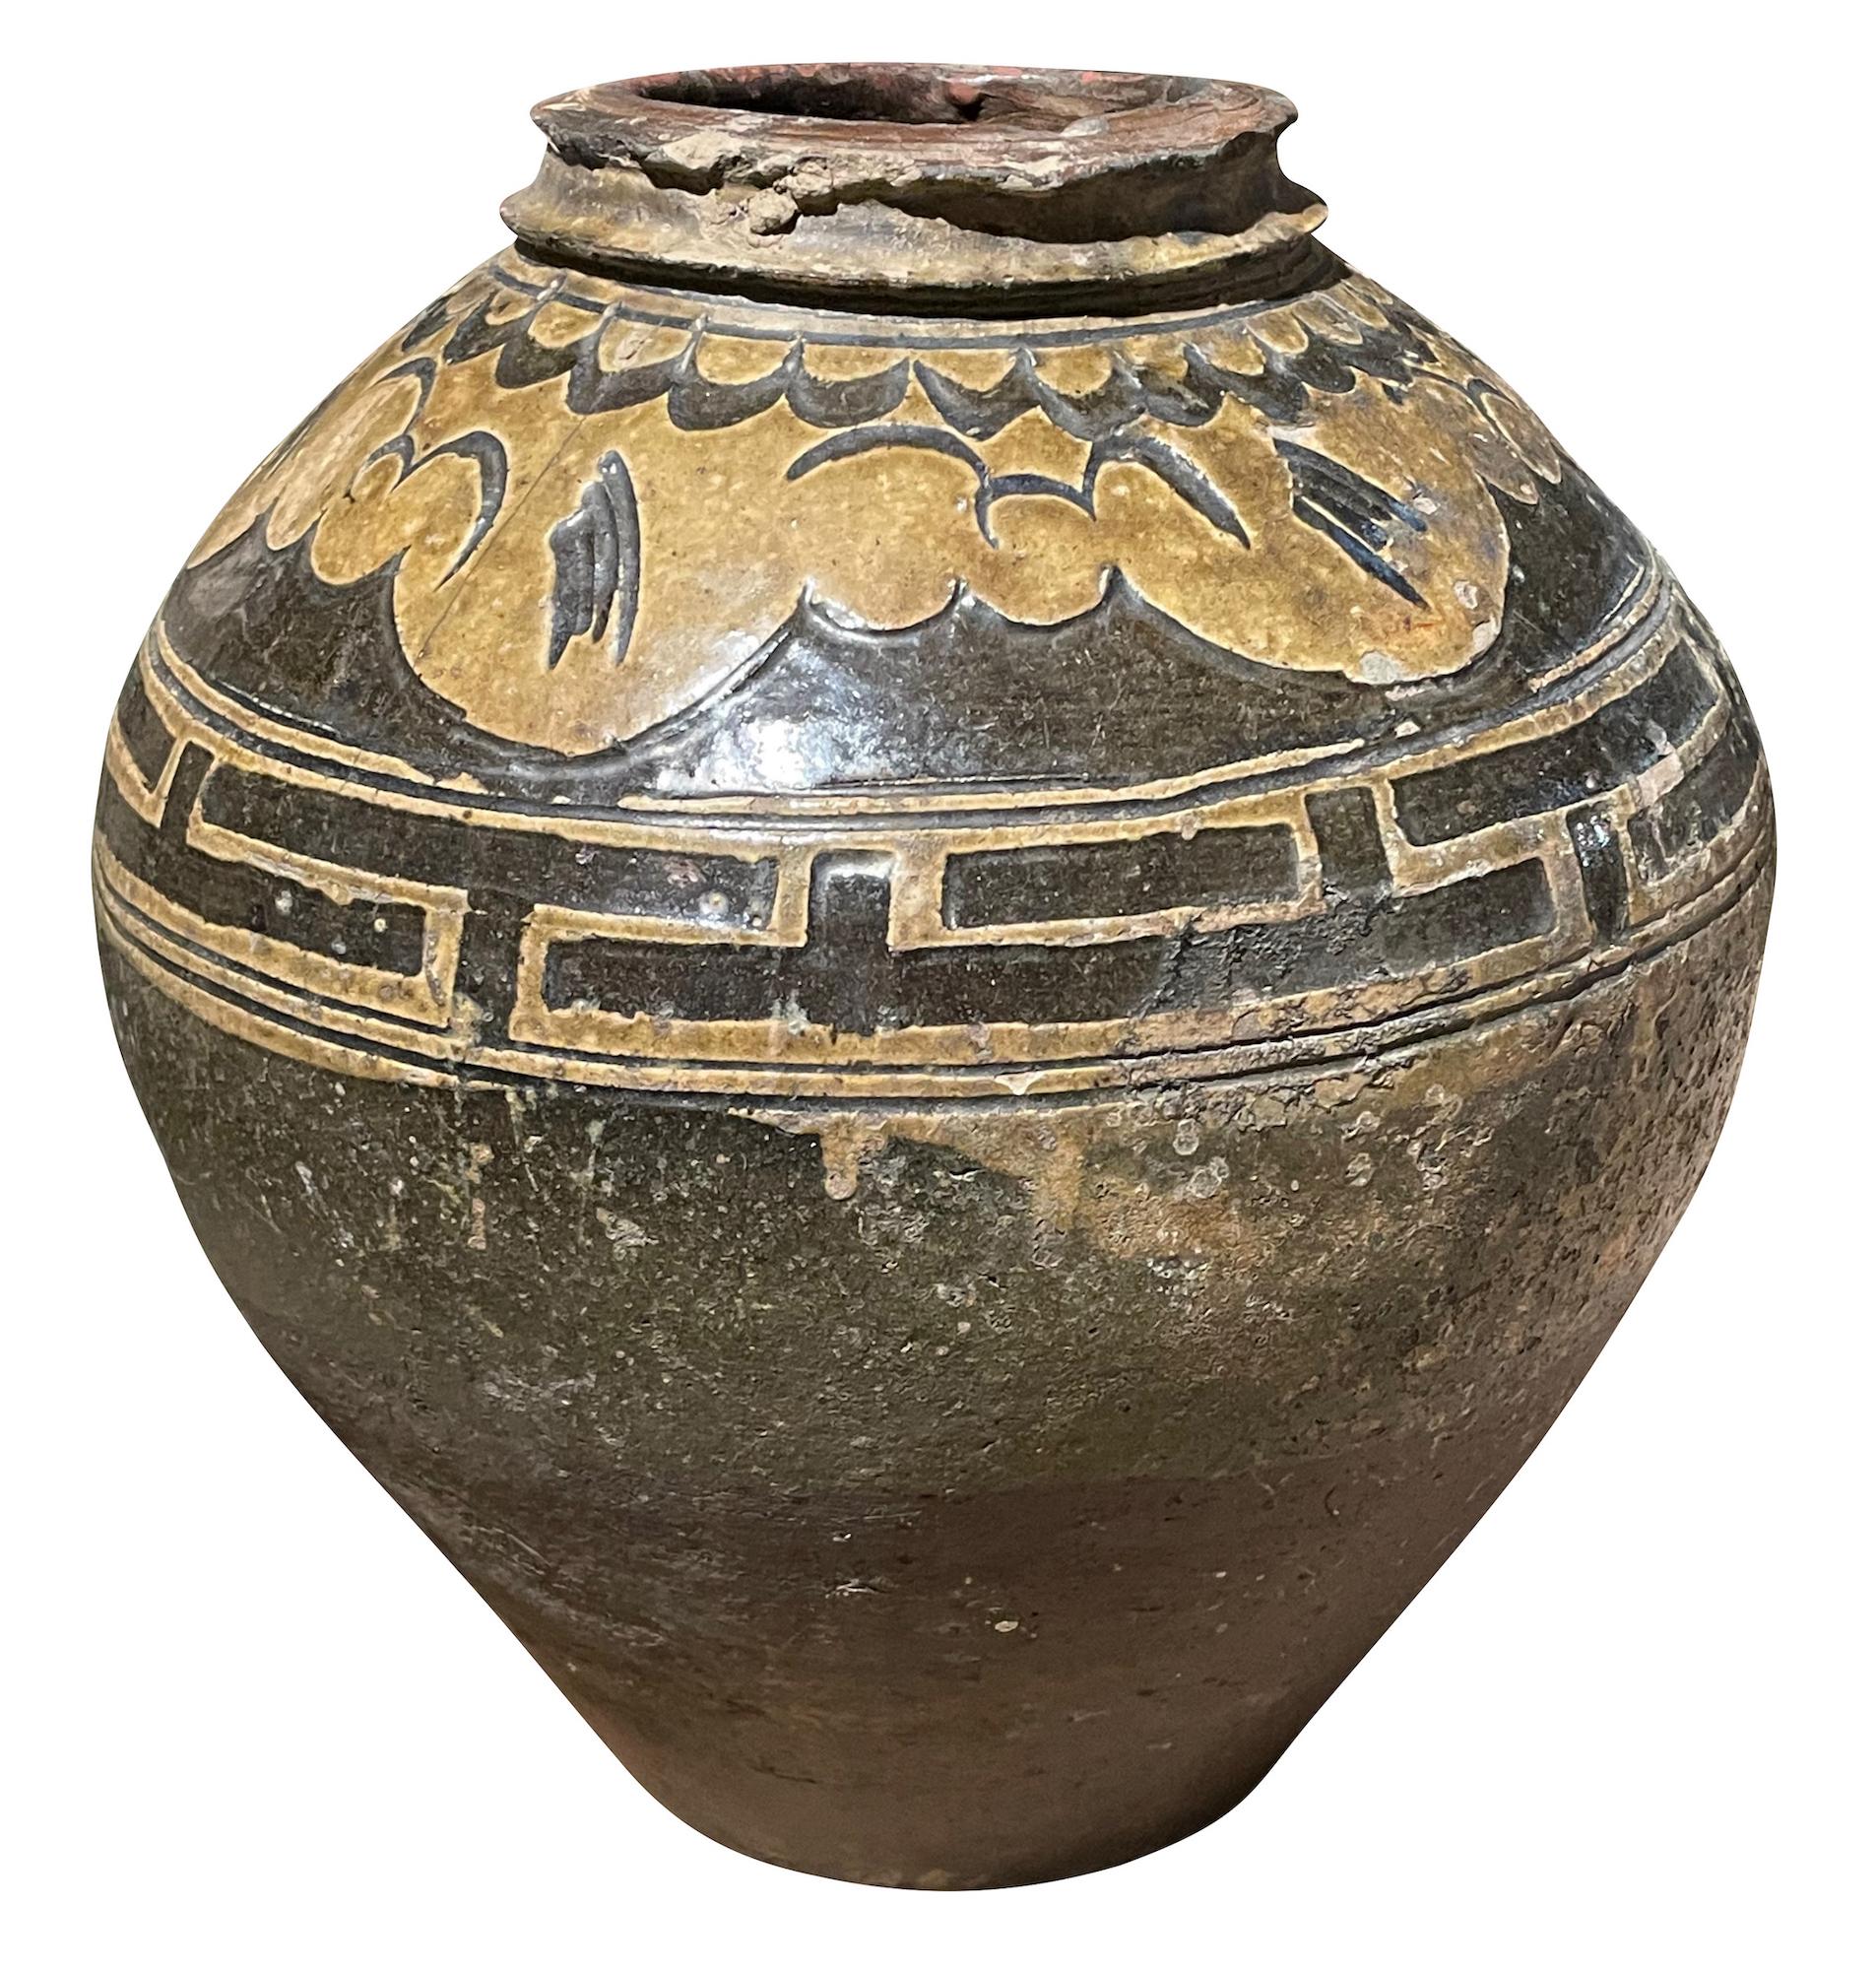 19th century Chinese round shaped vase in traditional olive and gold glaze.
Natural aged patina and wear.
Decorative geometric design.
Part of a large collection.
